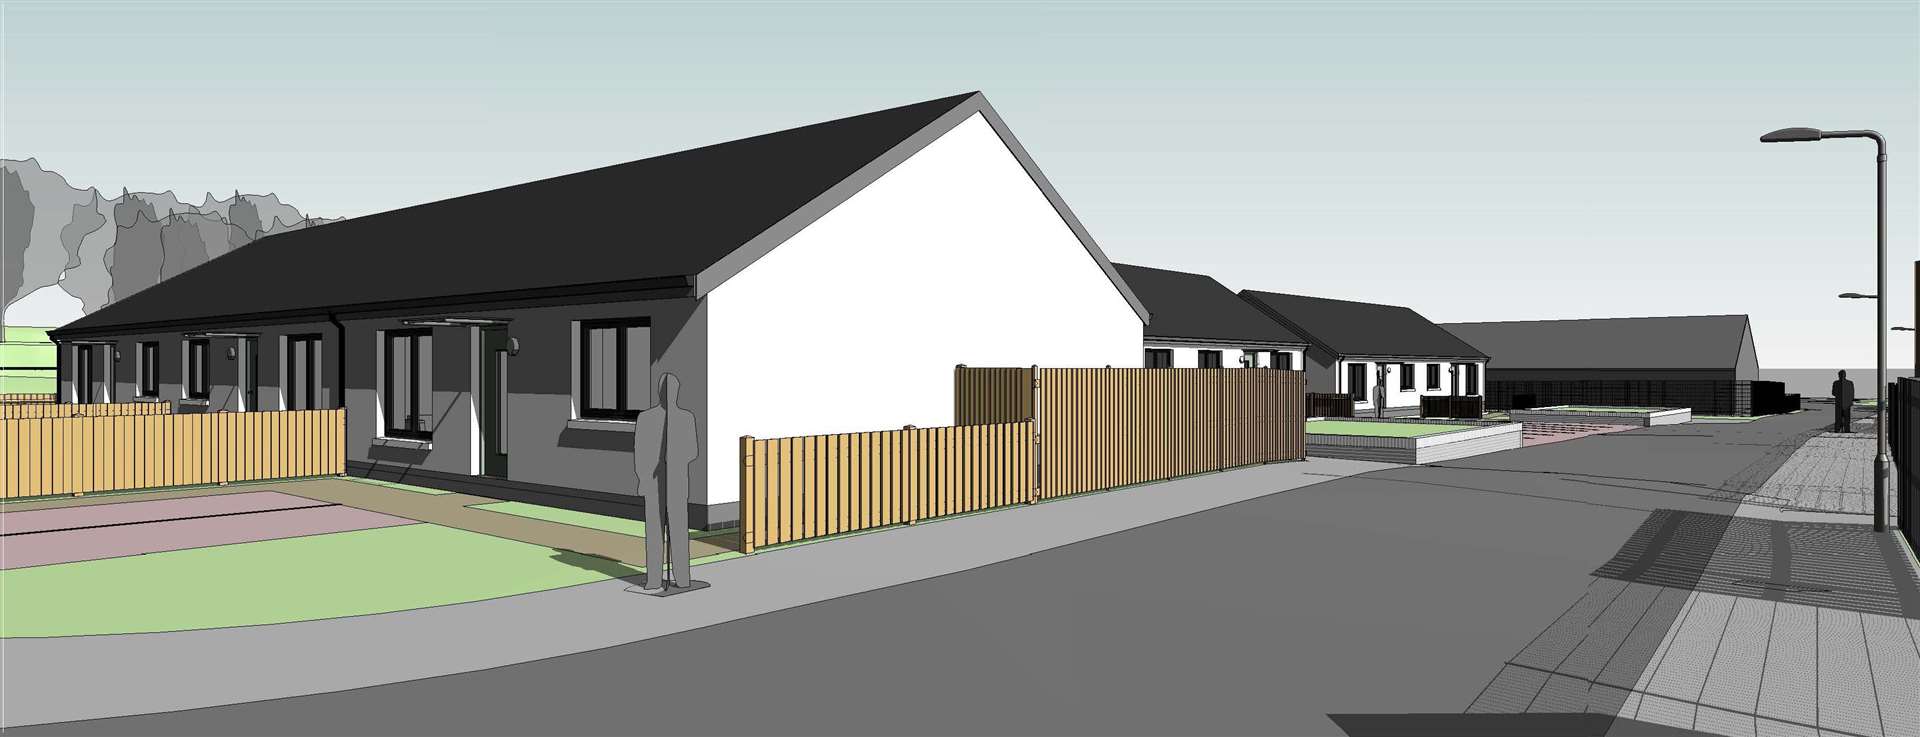 An impression of the bungalows proposed for Dalneigh as seen from the south east of the site.